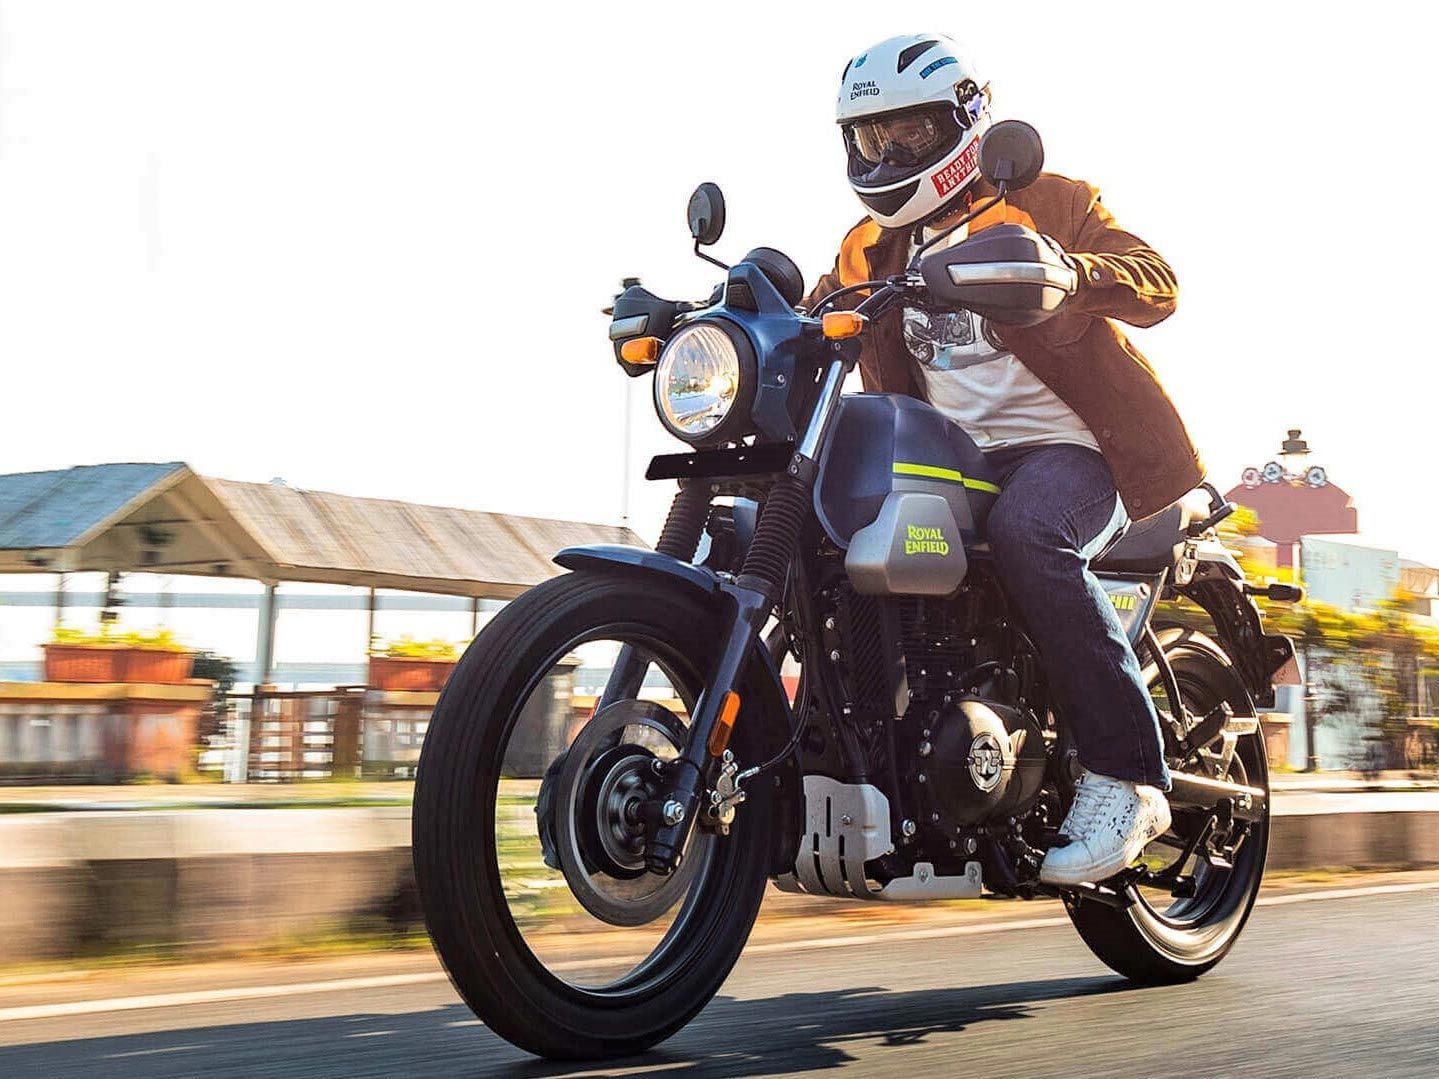 The new Scram 411 owes most of its components to the current Himalayan adventure bike, but brings a way sleeker vibe.